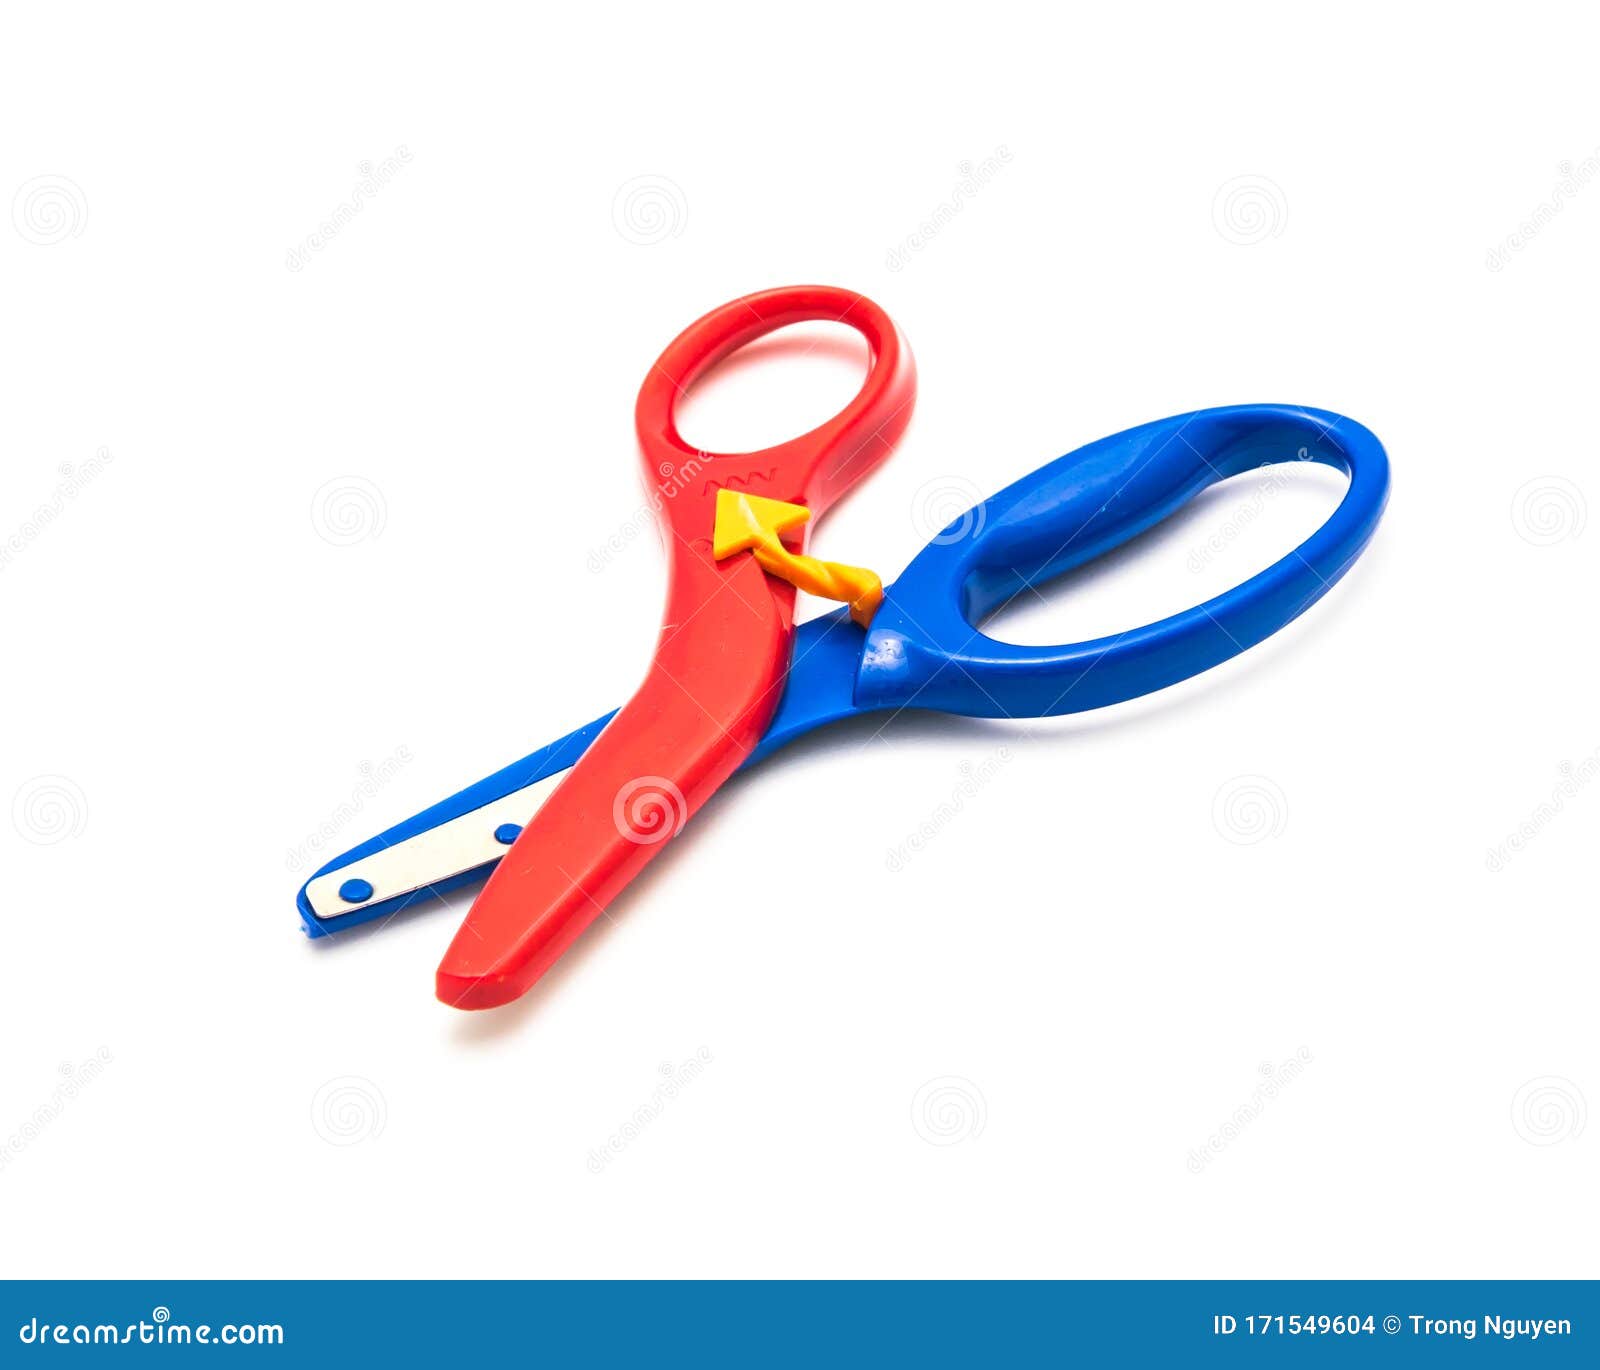 Preschool Scissors with Training Lever for Kids Isolated on White